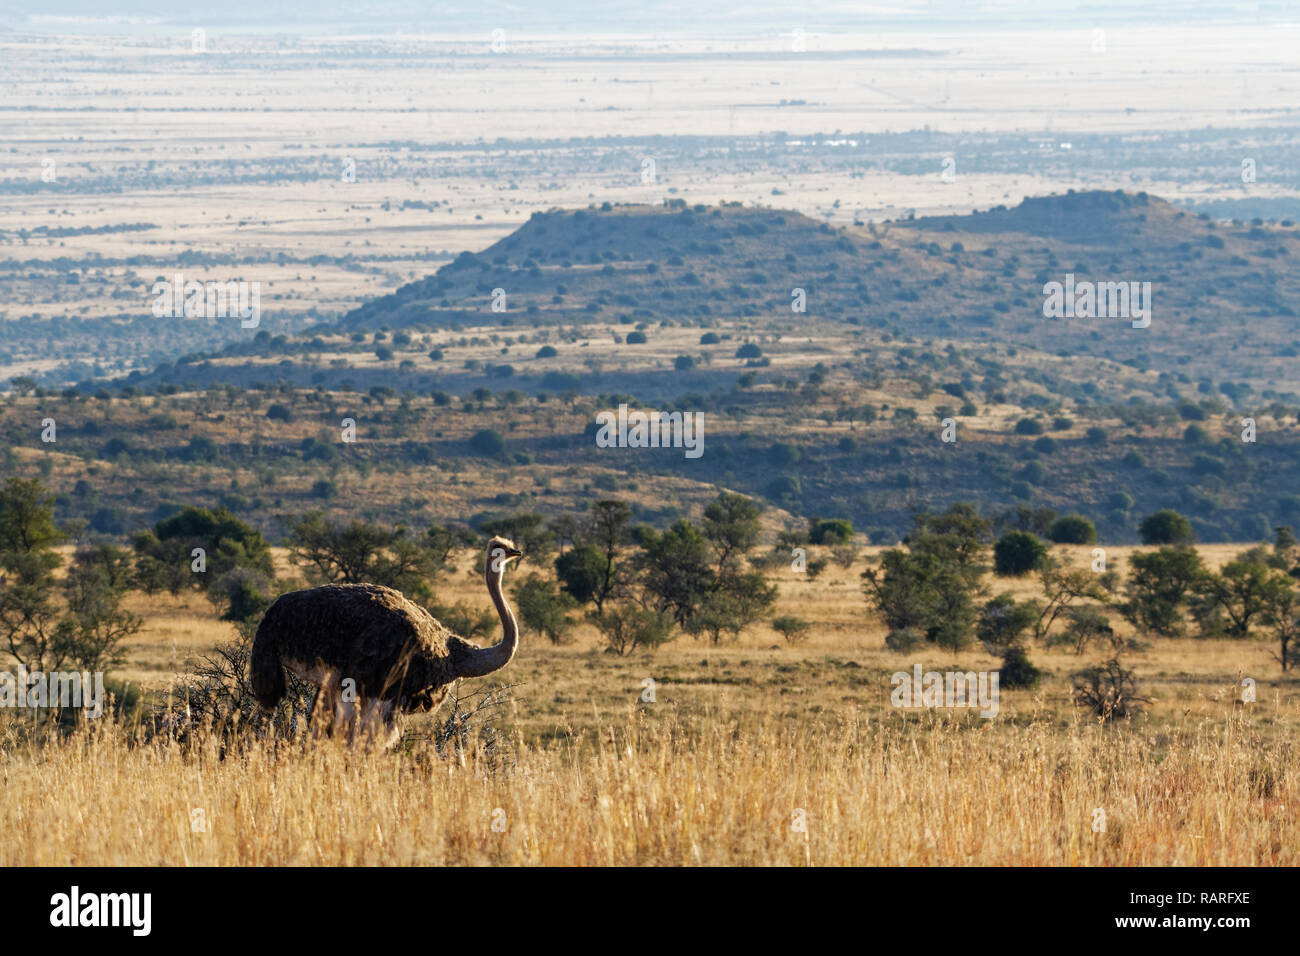 South African ostrich (Struthio camelus australis), adult female, in open grassland, foraging, Mountain Zebra National Park, Eastern Cape, South Afric Stock Photo